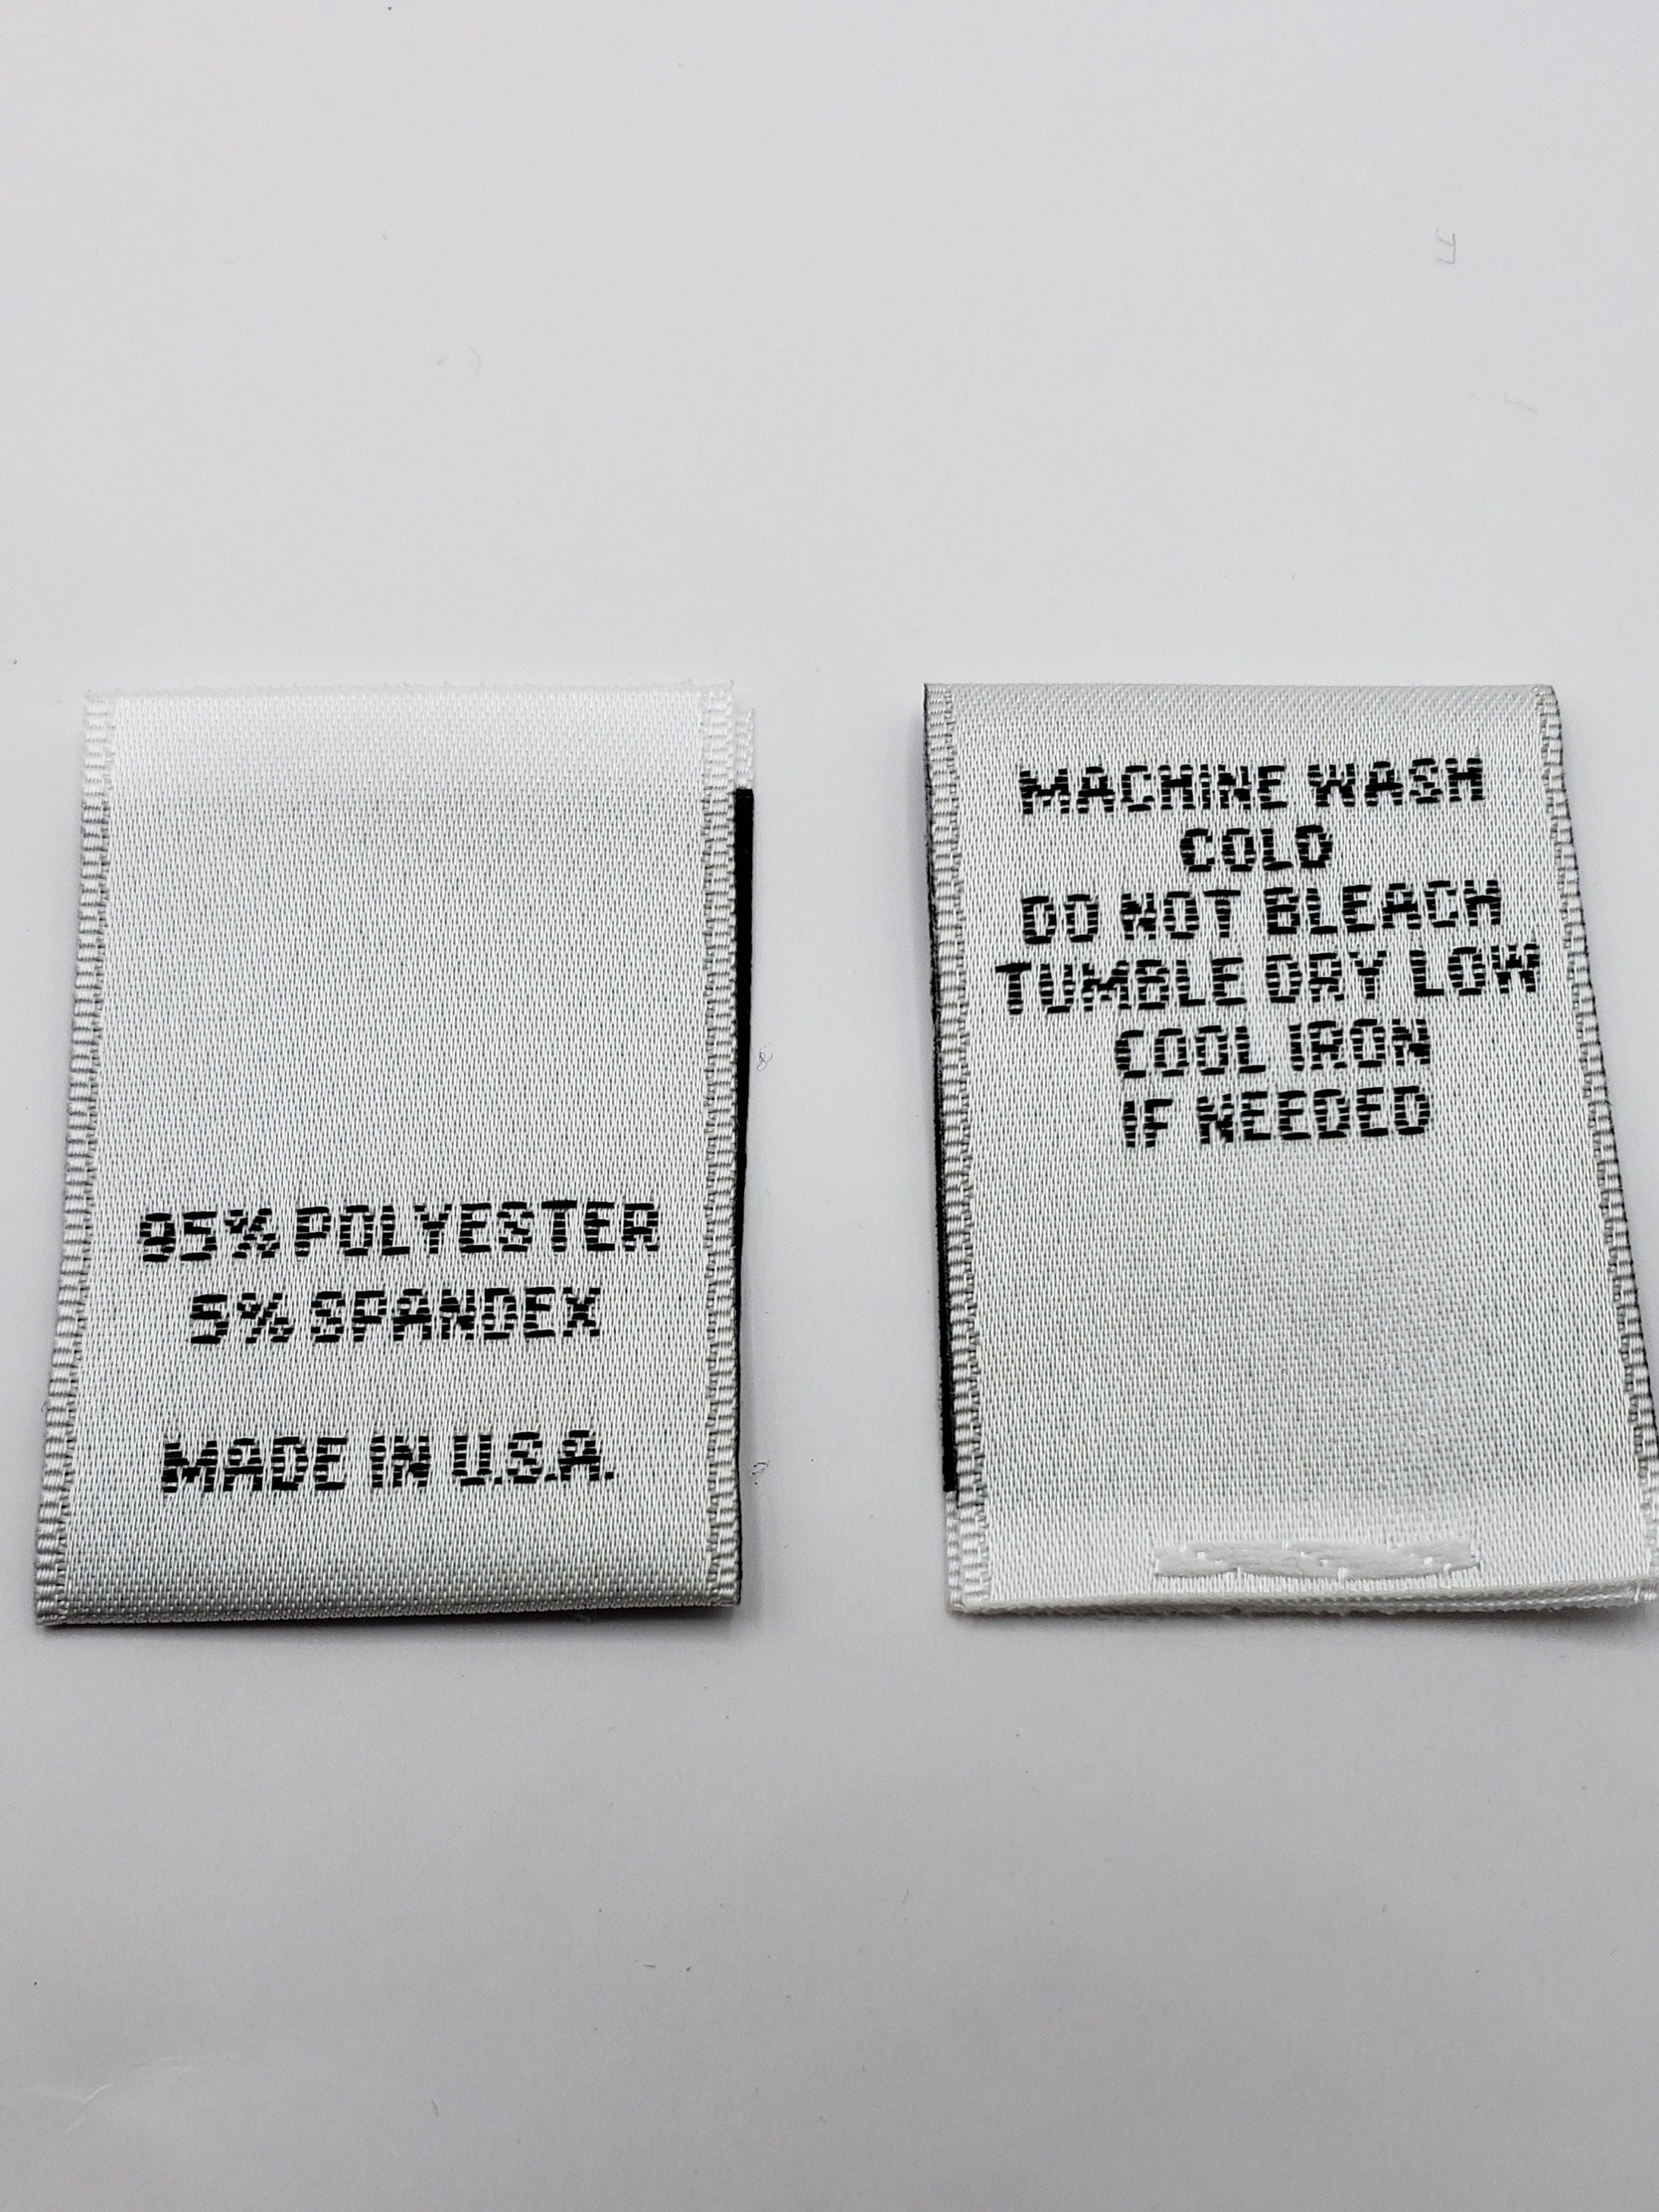 high quality clothes label garment standard